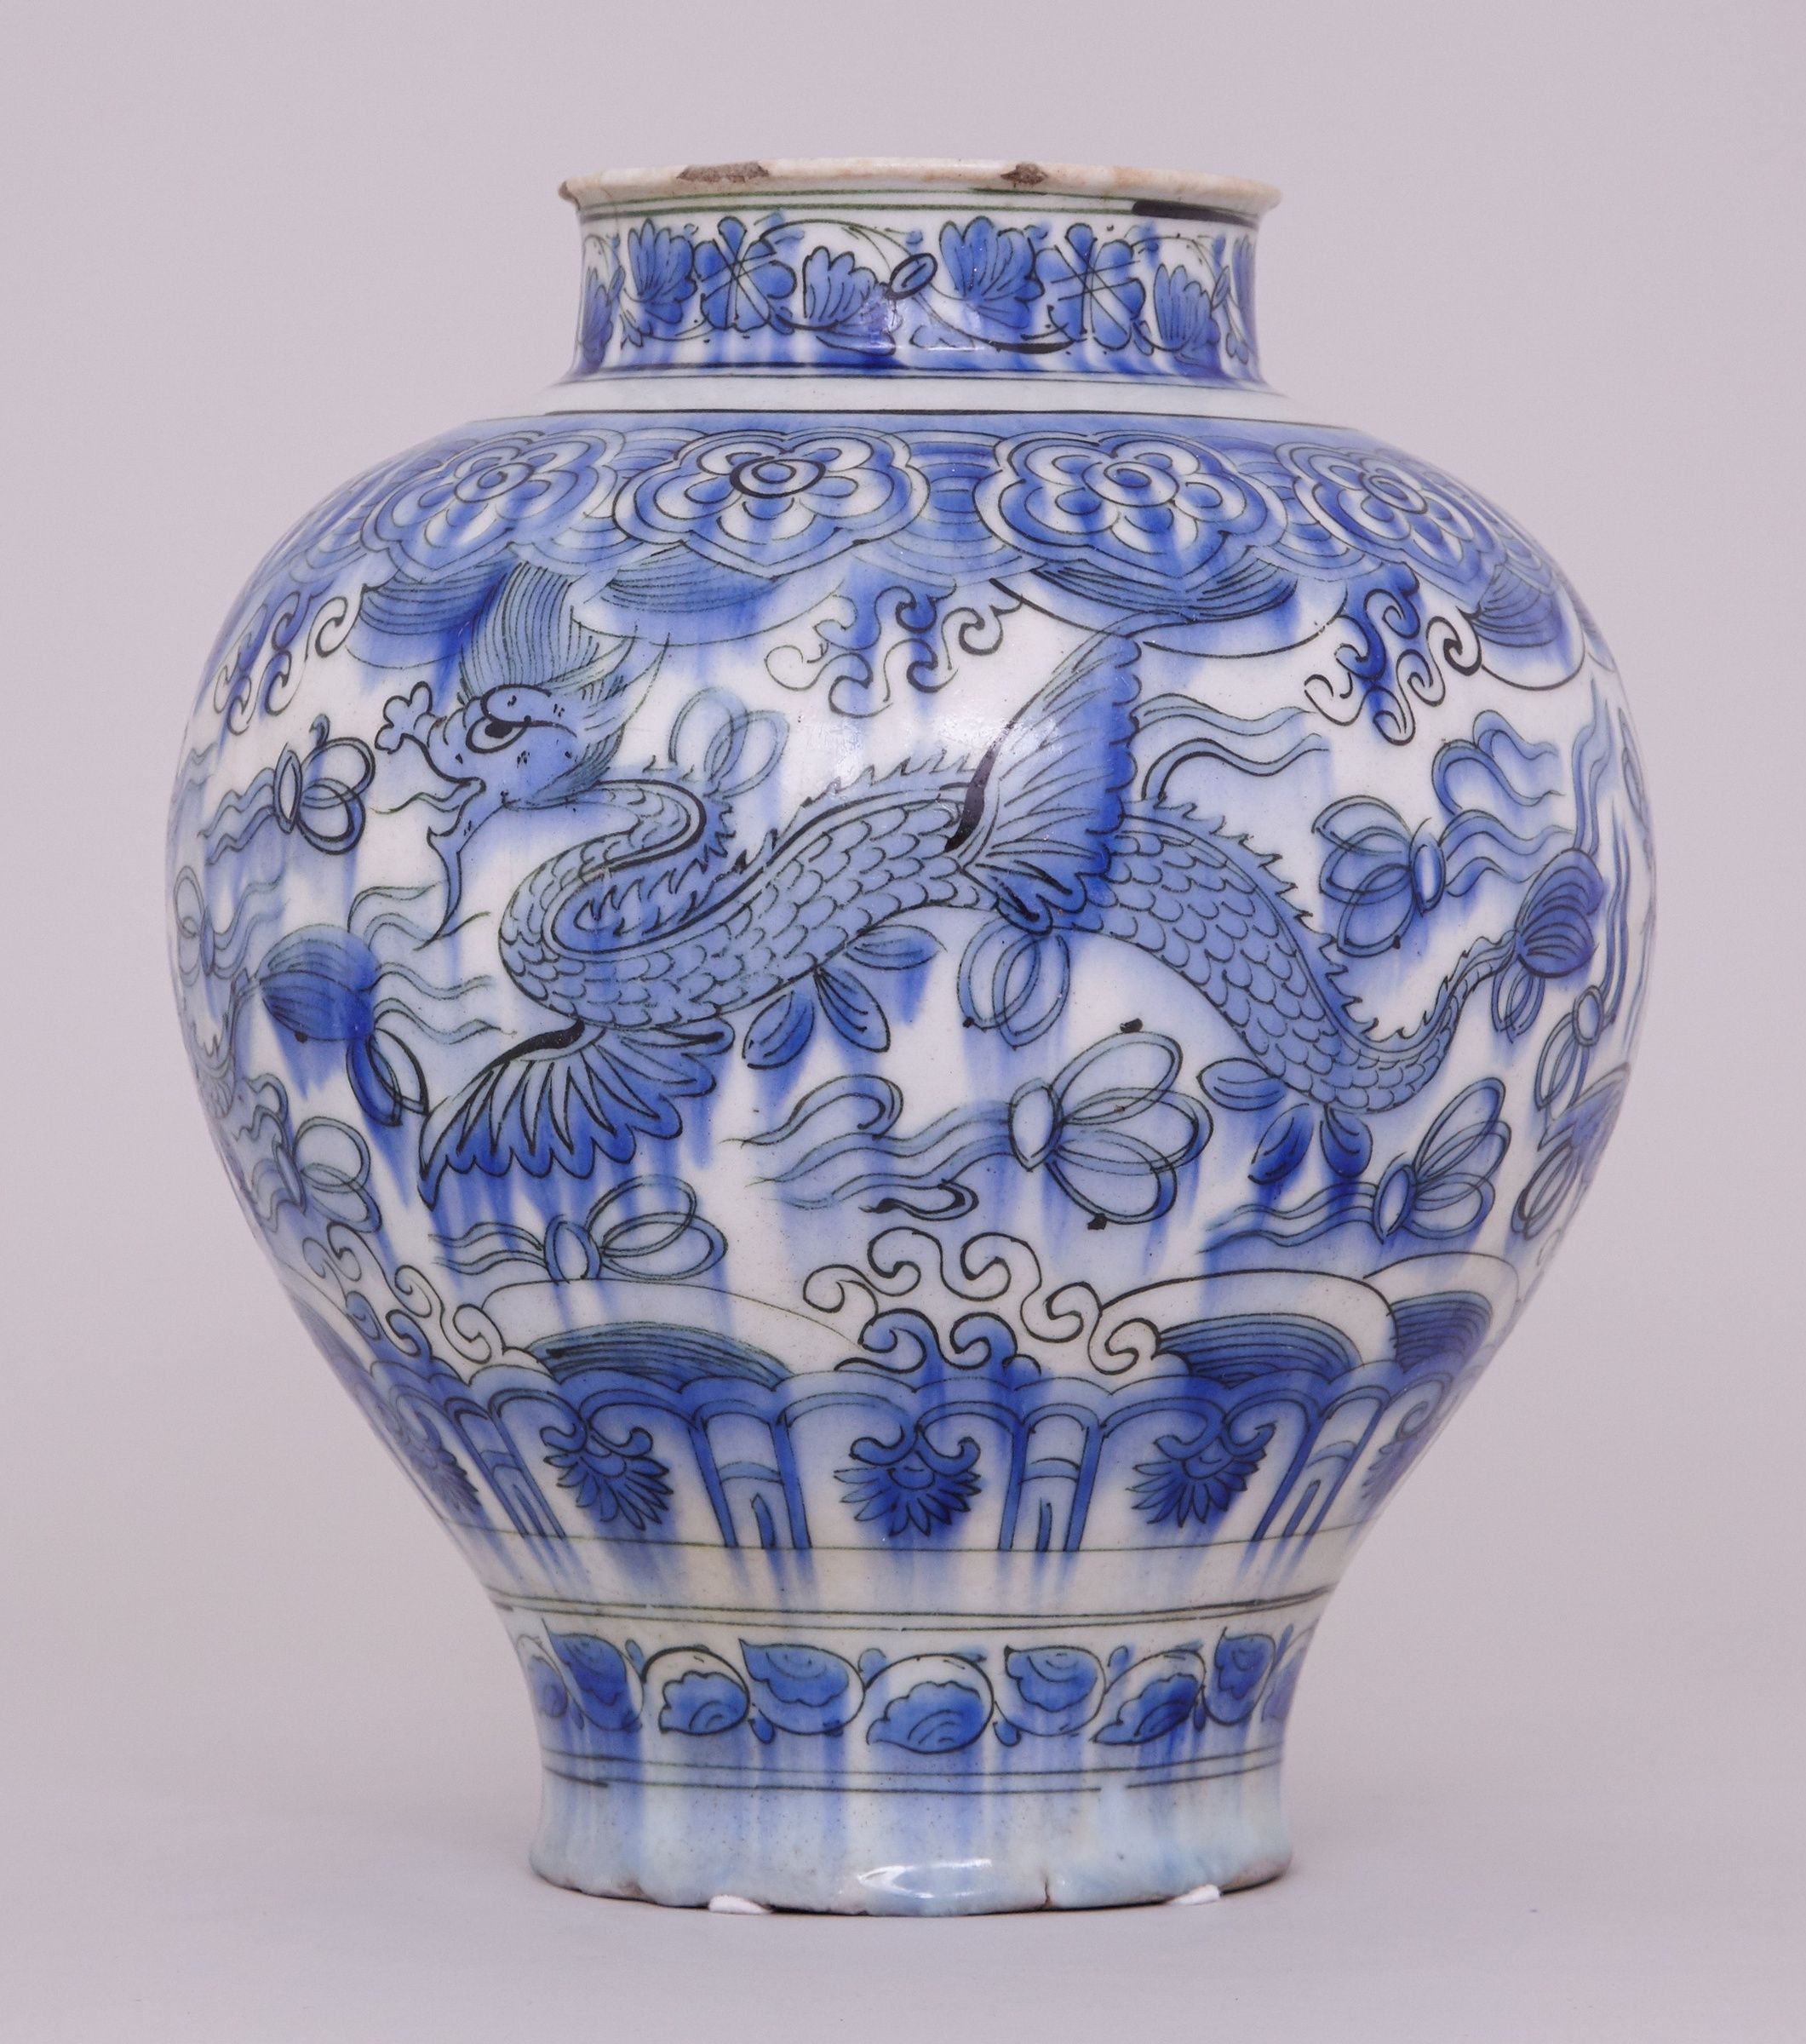 25 Cute Antique Chinese Pottery Vases 2024 free download antique chinese pottery vases of white pottery vase elegant a blue and white persian safavid jar 17th in white pottery vase elegant a blue and white persian safavid jar 17th century